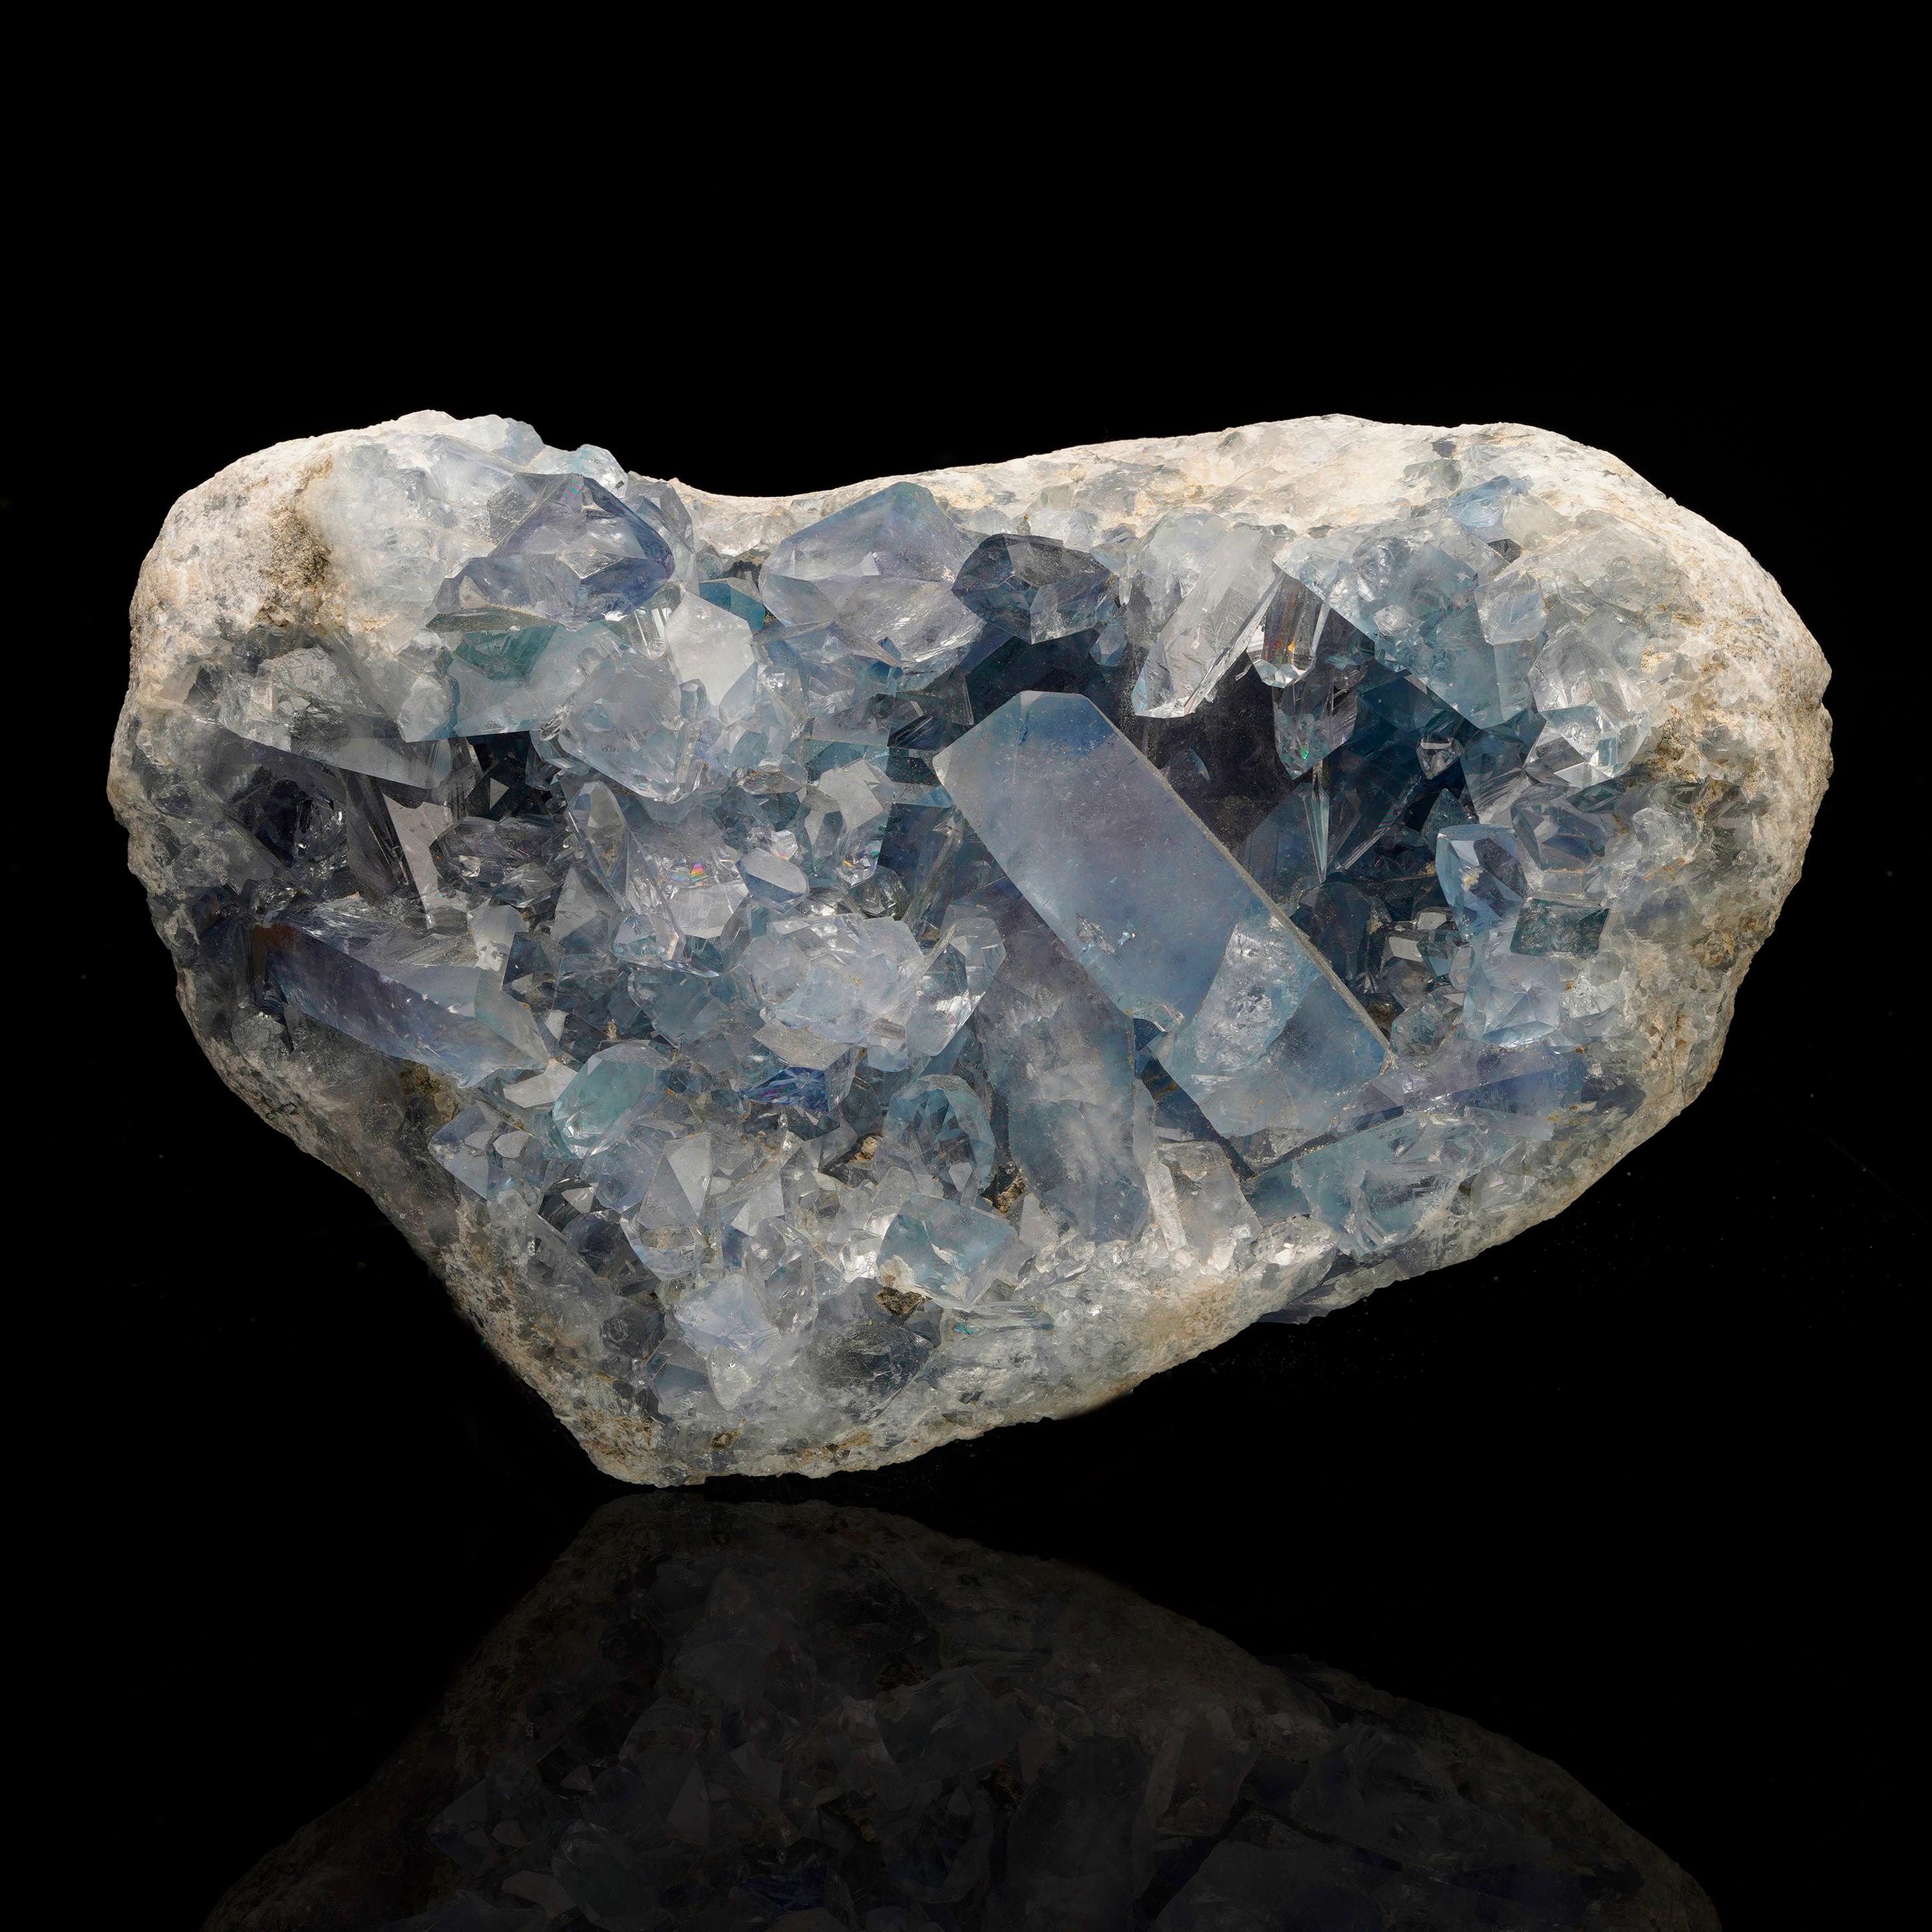 This open blue celestite geode features large, gemmy, glass-clear crystals with light to denim blue pigmentation, many with sharp, perfect terminations. This piece features incredible luster and the prismatic crystals create a treasure trove of